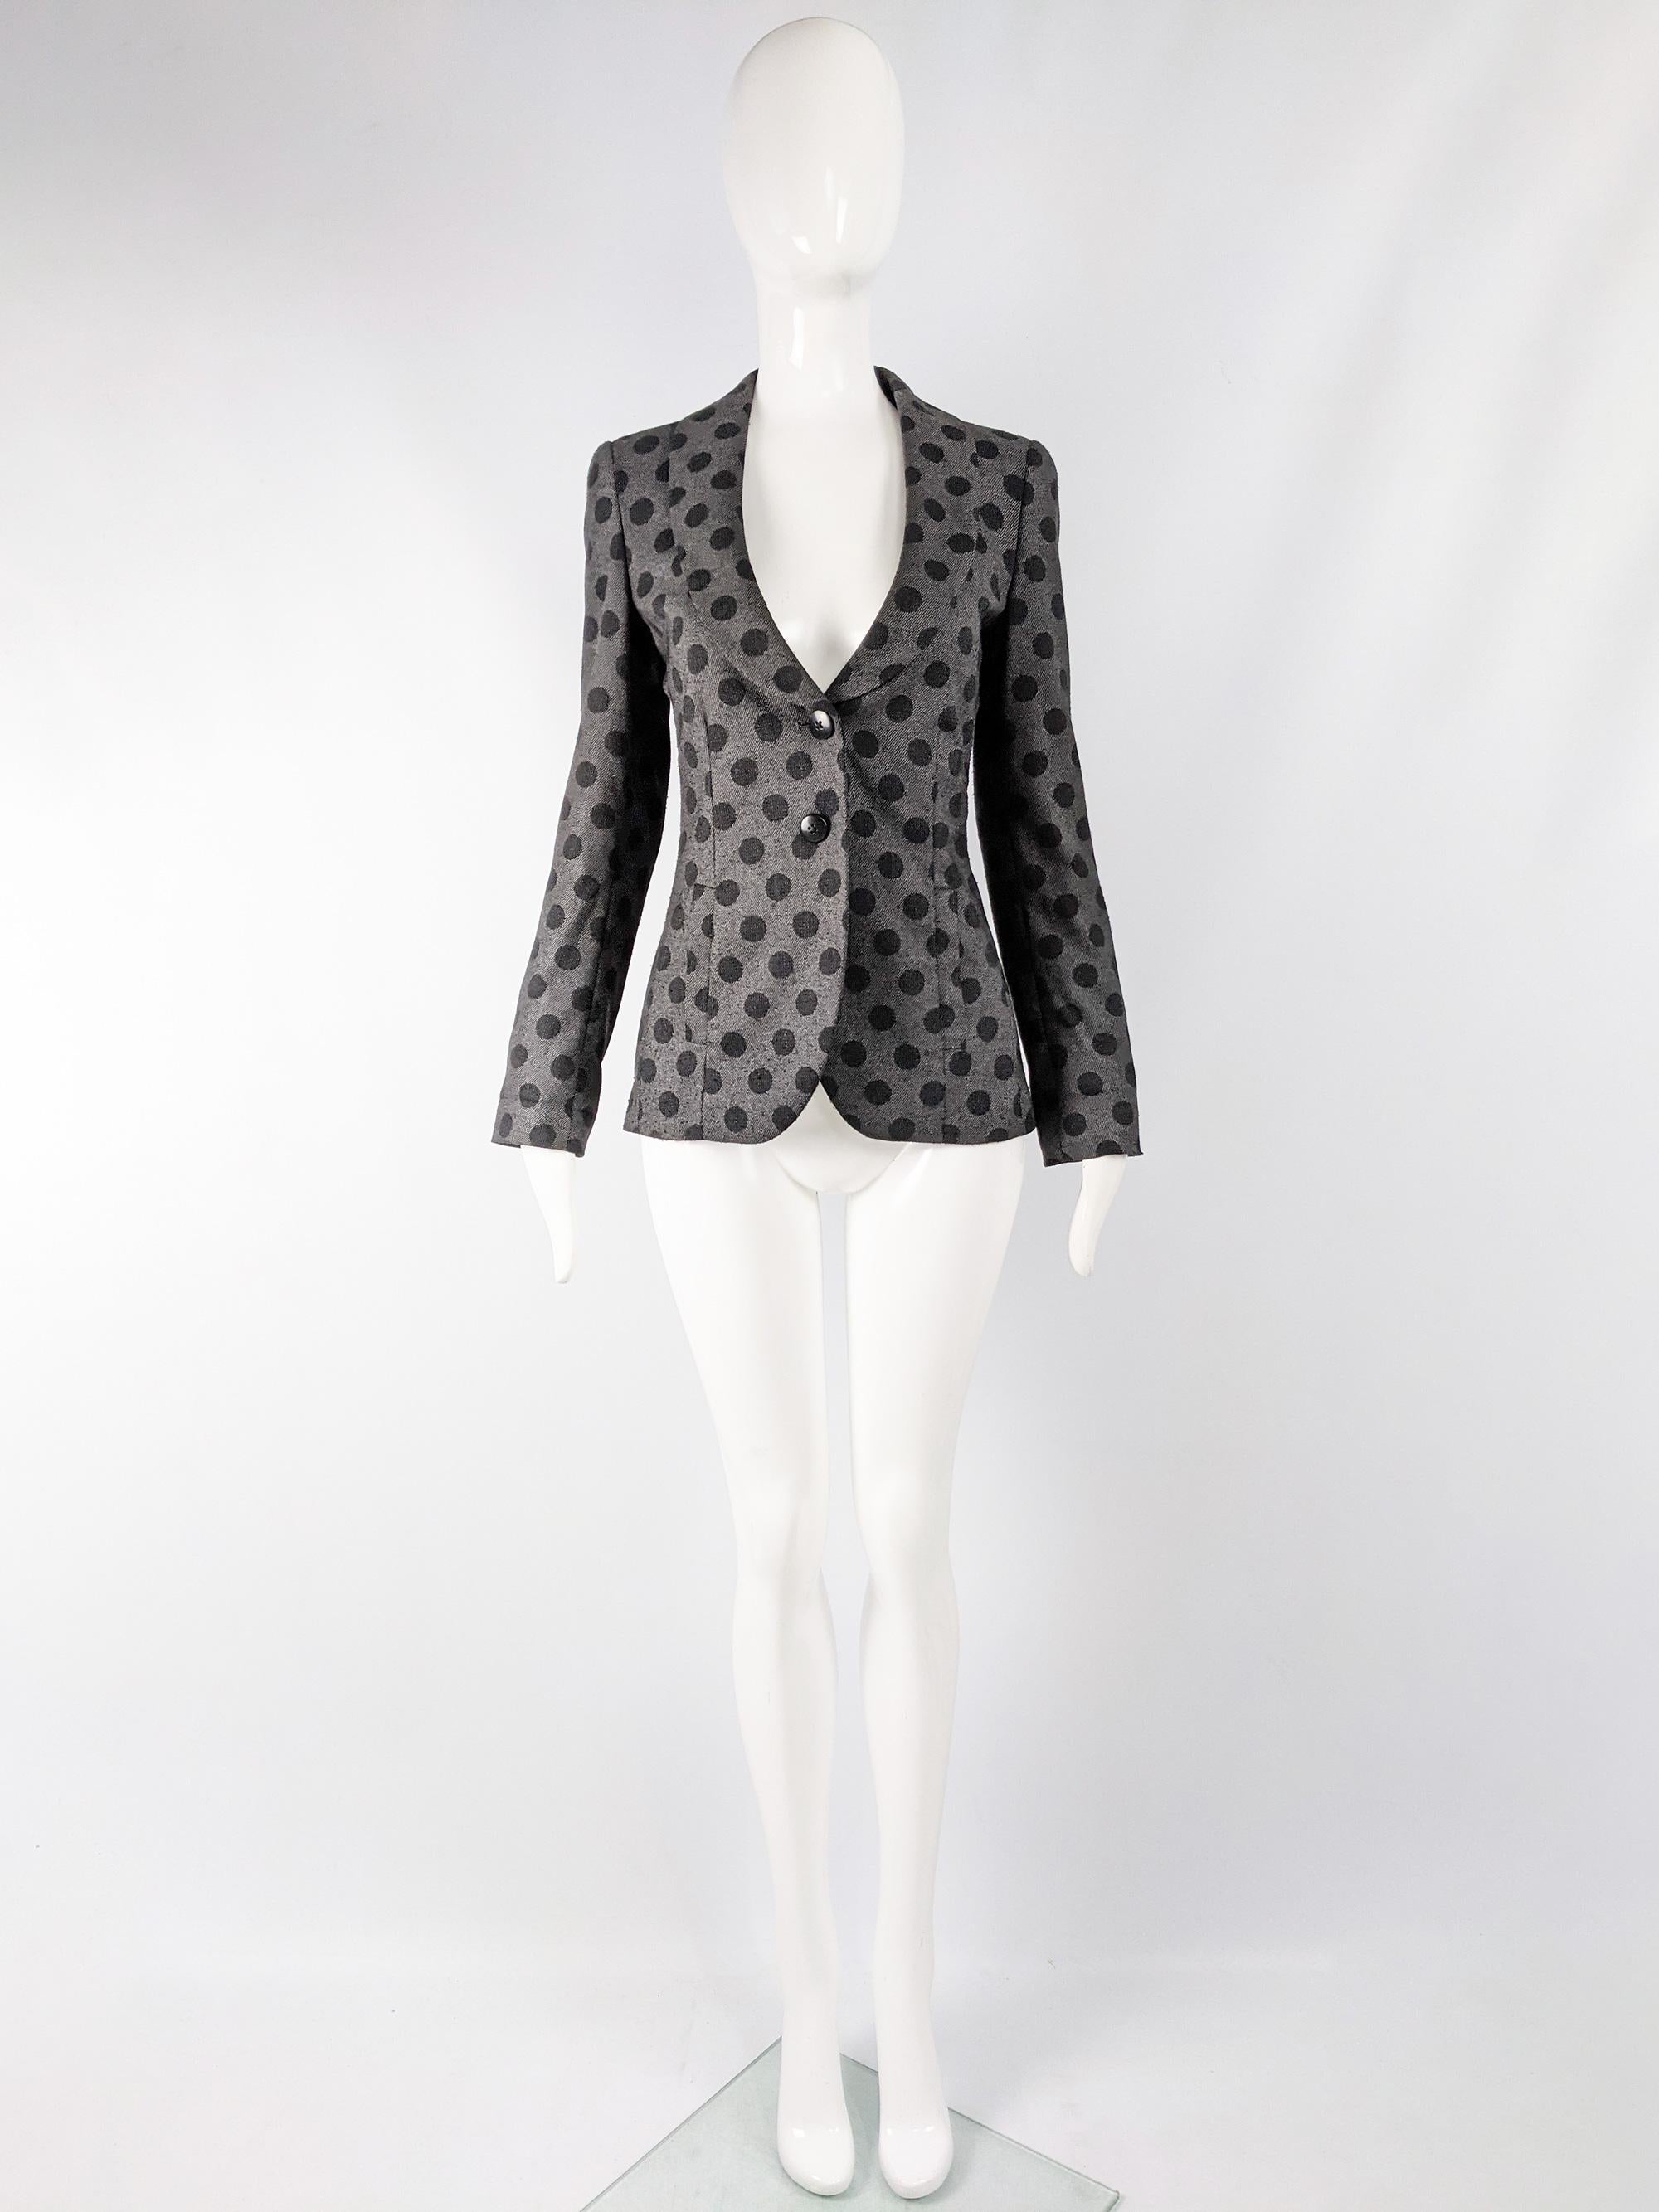 A chic preowned womens Emporio Armani blazer jacket with a large polka dot pattern woven throughout. 

Size: Marked IT 38 but fits more like a UK 8/ US 4/ EU 36. Please check measurements. 
Bust - 34” / 86cm
Waist - 28” / 71cm
Length (Shoulder to